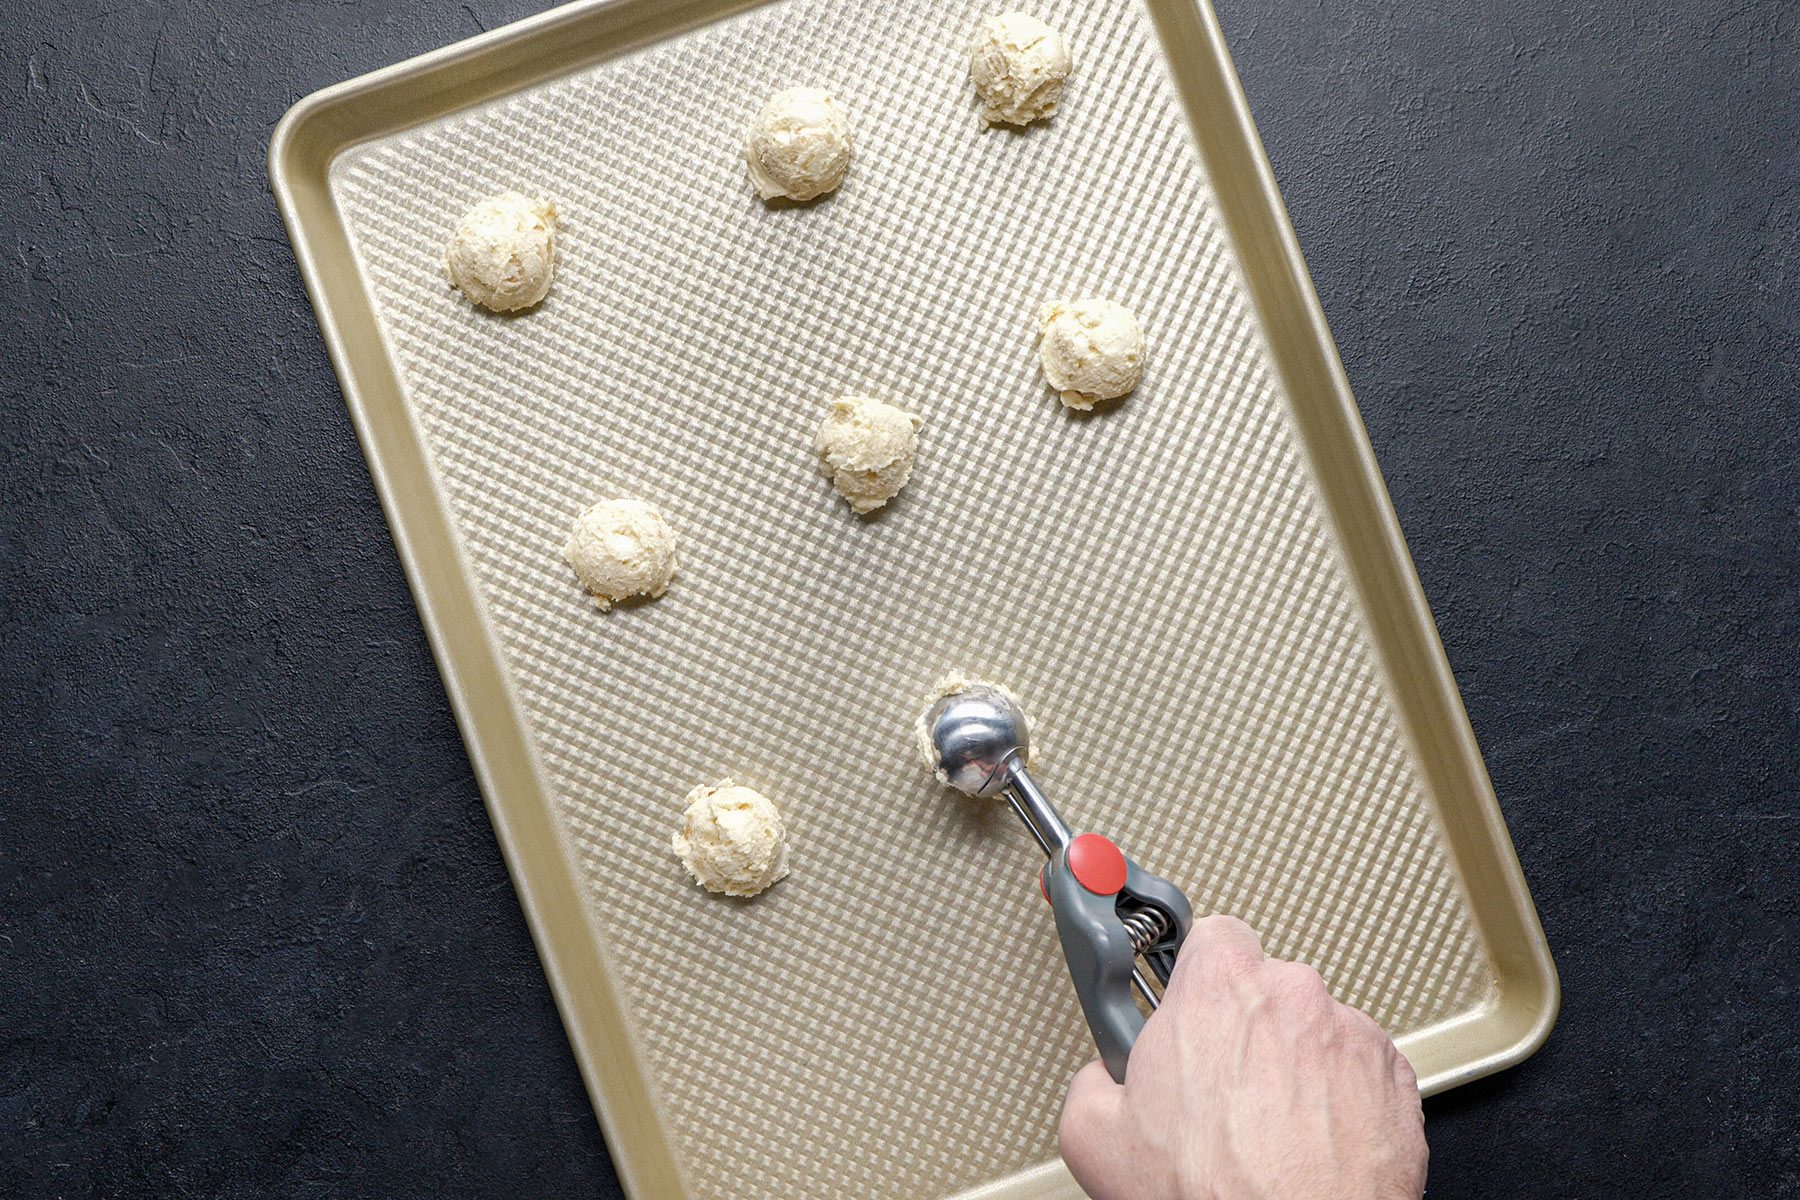 Scooping out cookie dough mix on baking tray